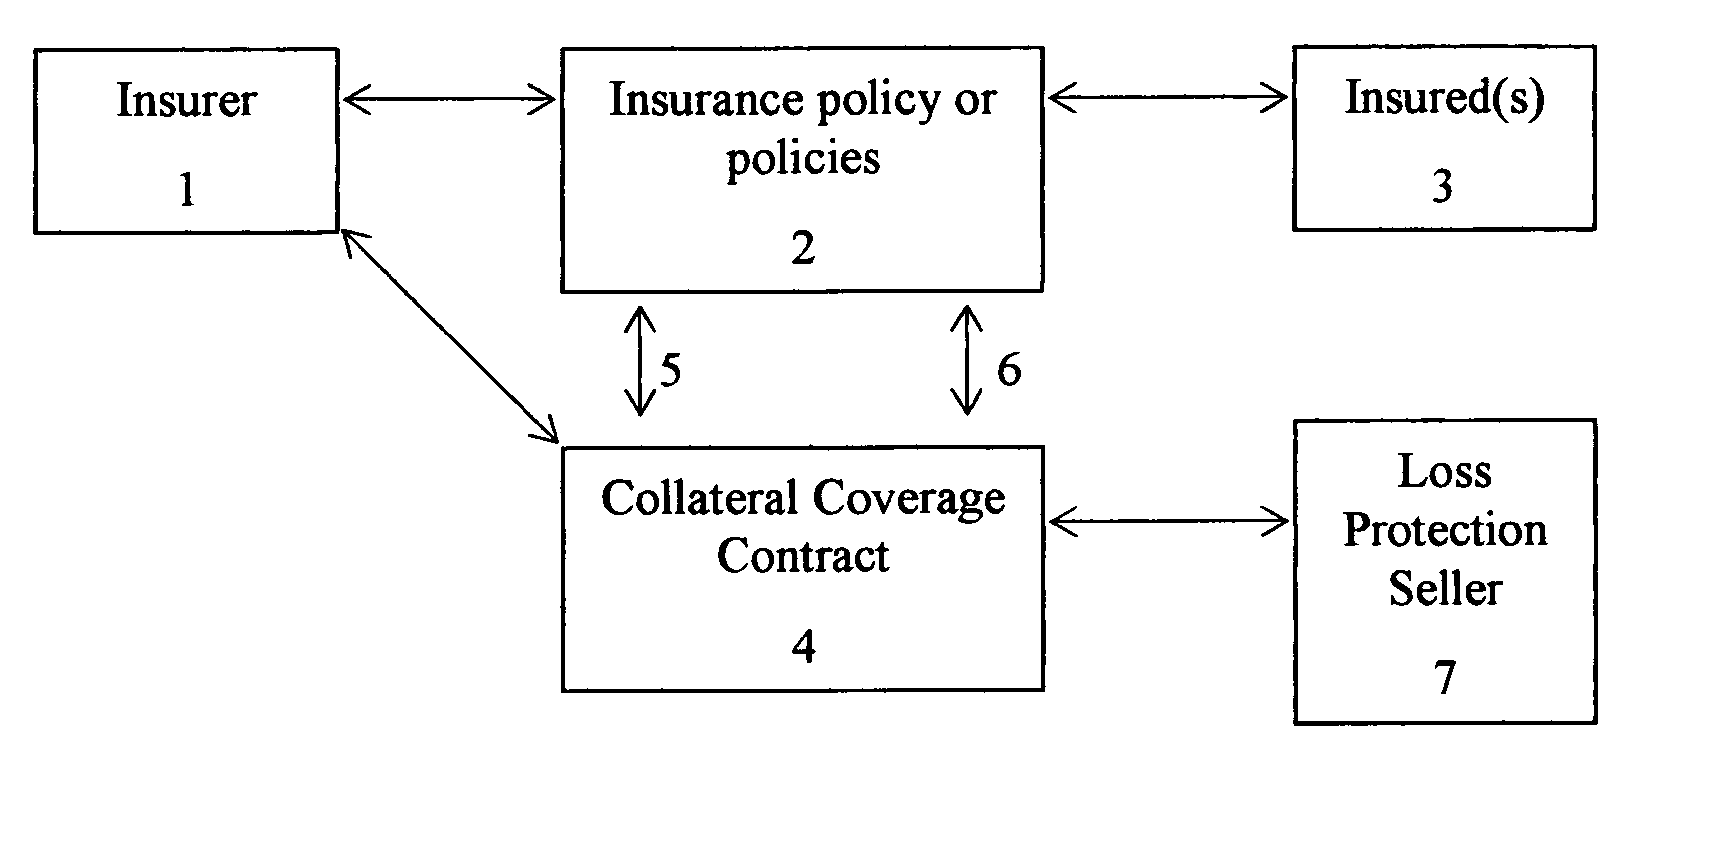 Collateral coverage for insurers and advisors